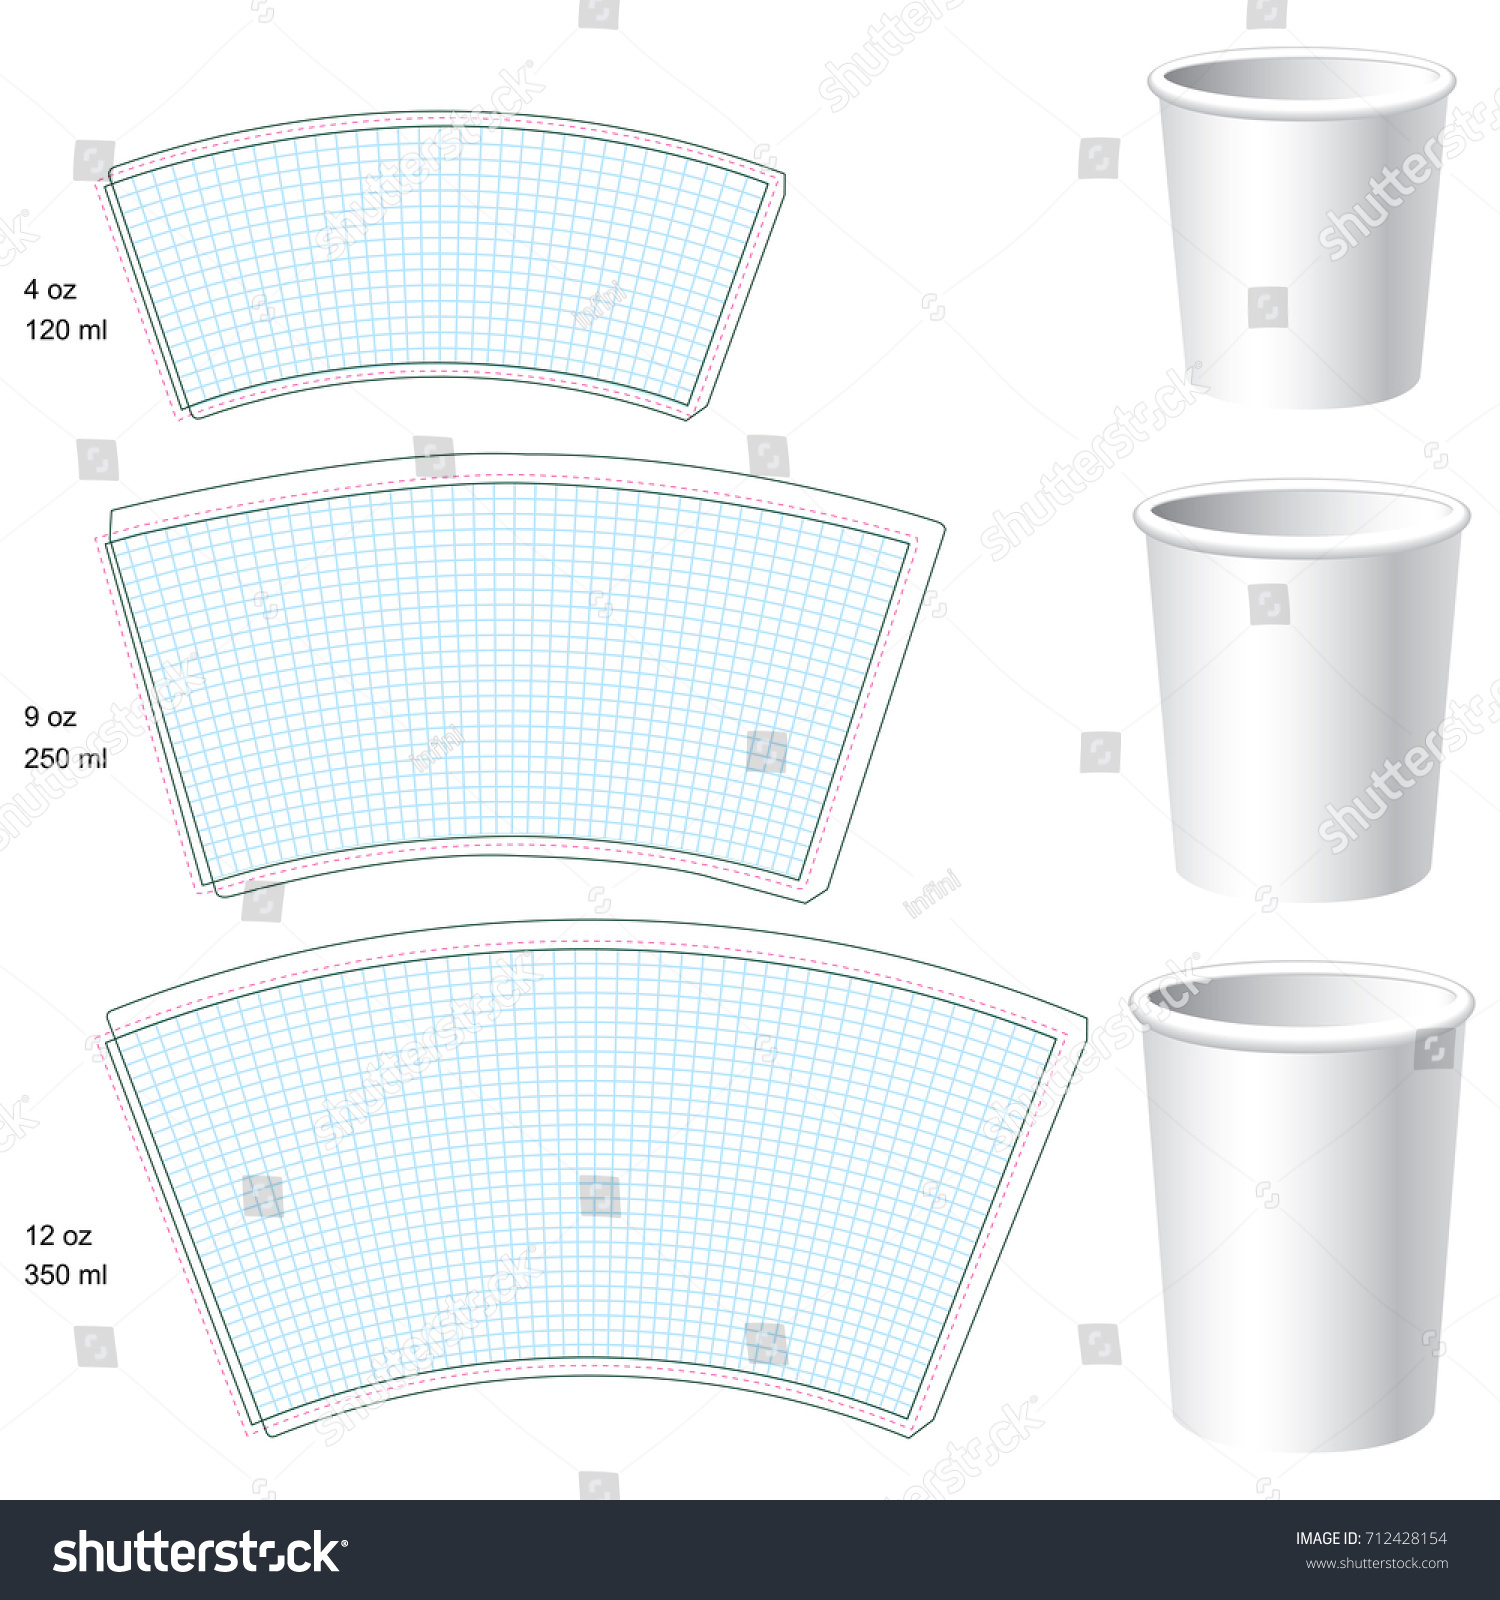 paper-cup-vector-blank-templates-3-stock-vector-royalty-free-712428154-shutterstock